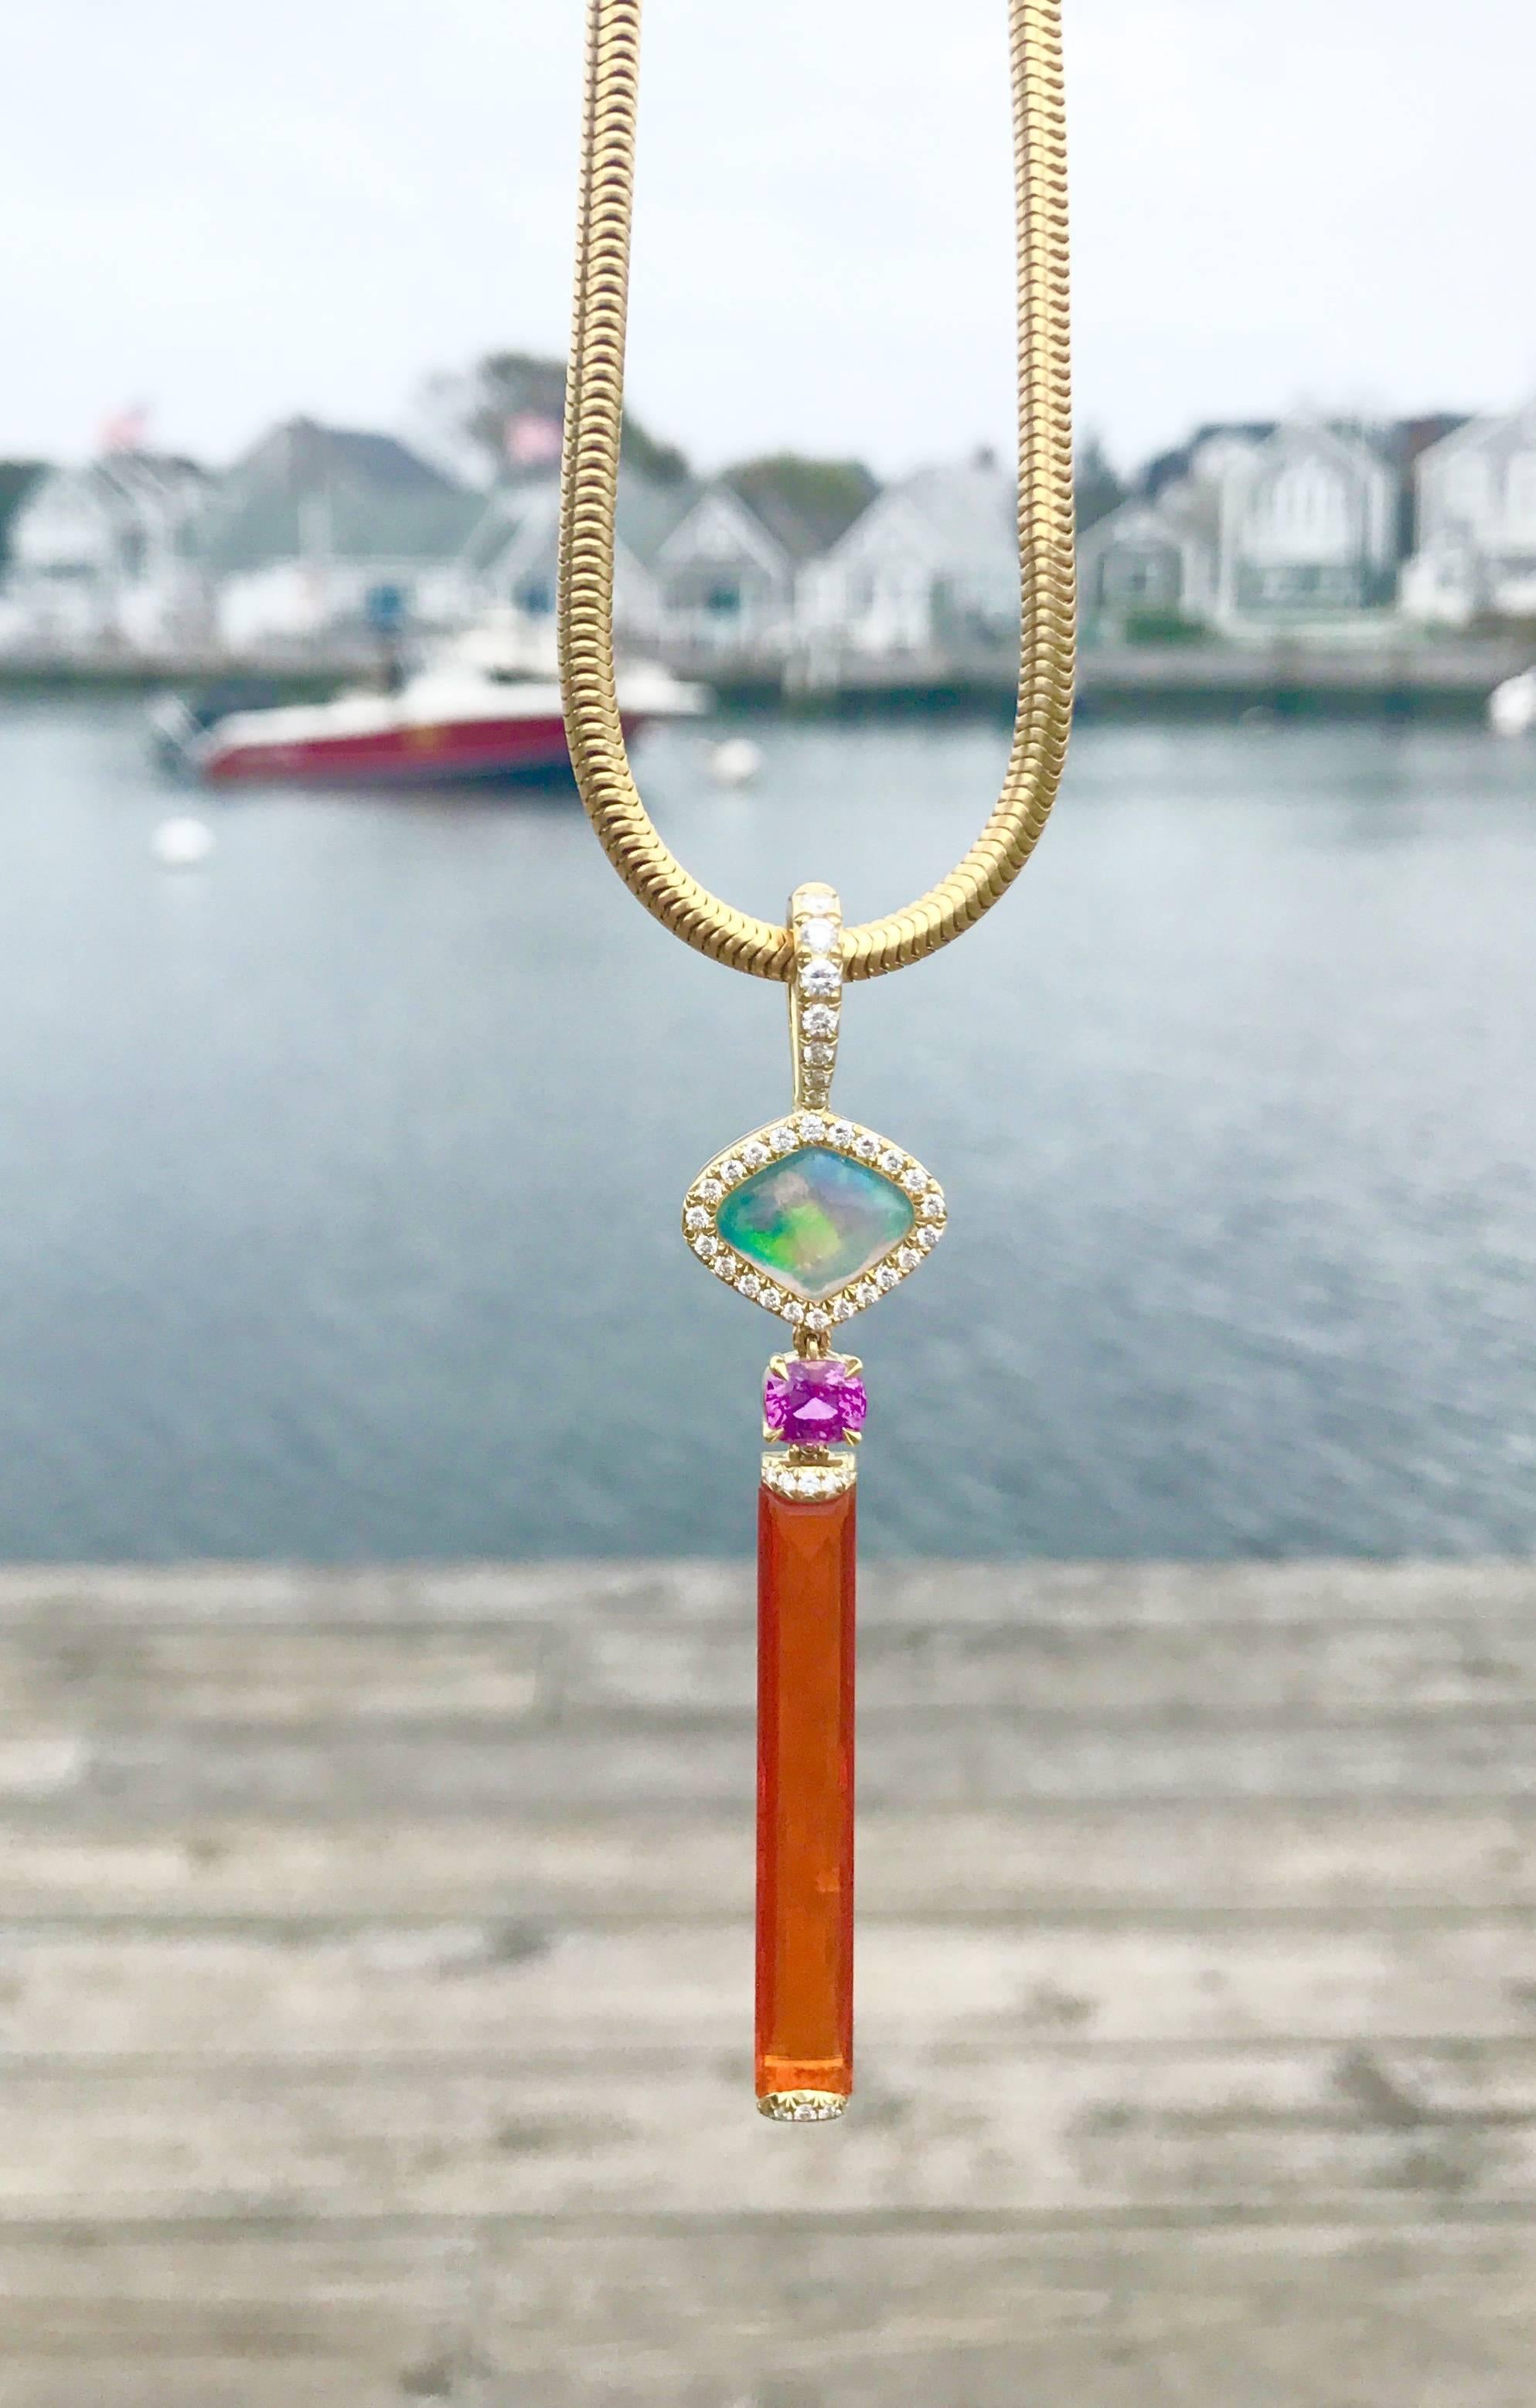 The milky Water Opal is surrounded by Diamonds on a beautiful bale that acts as a clasp for attaching to any necklace of your choice. A deep pink Spinel hangs between the Water Opal and a long rectangular Fire Opal, which is capped at both ends with